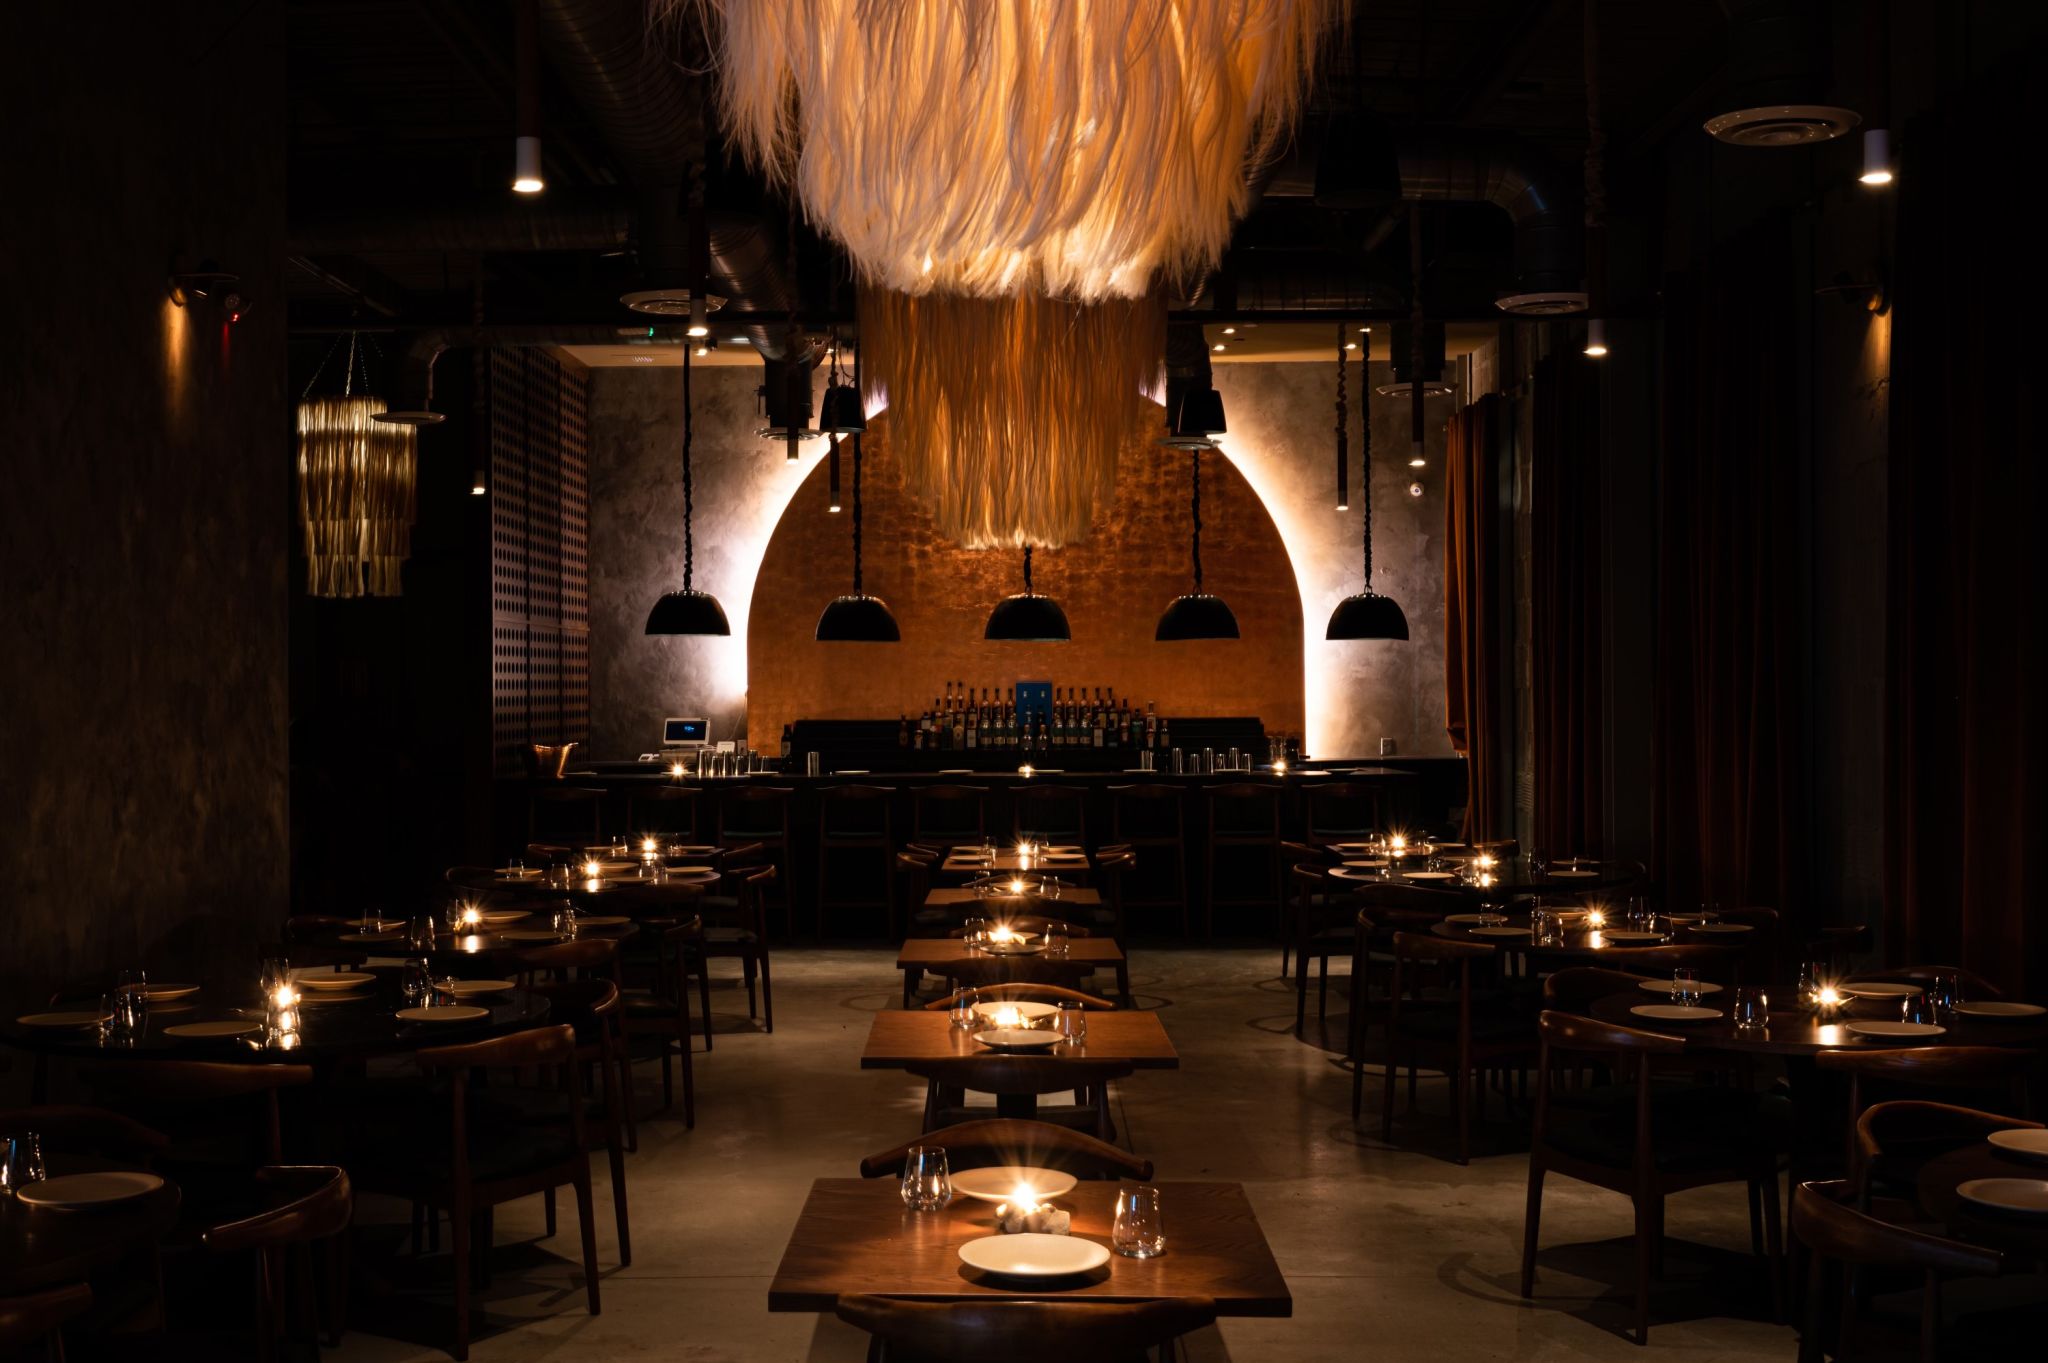 Enjoy a supper-club style meal at Palo Santo